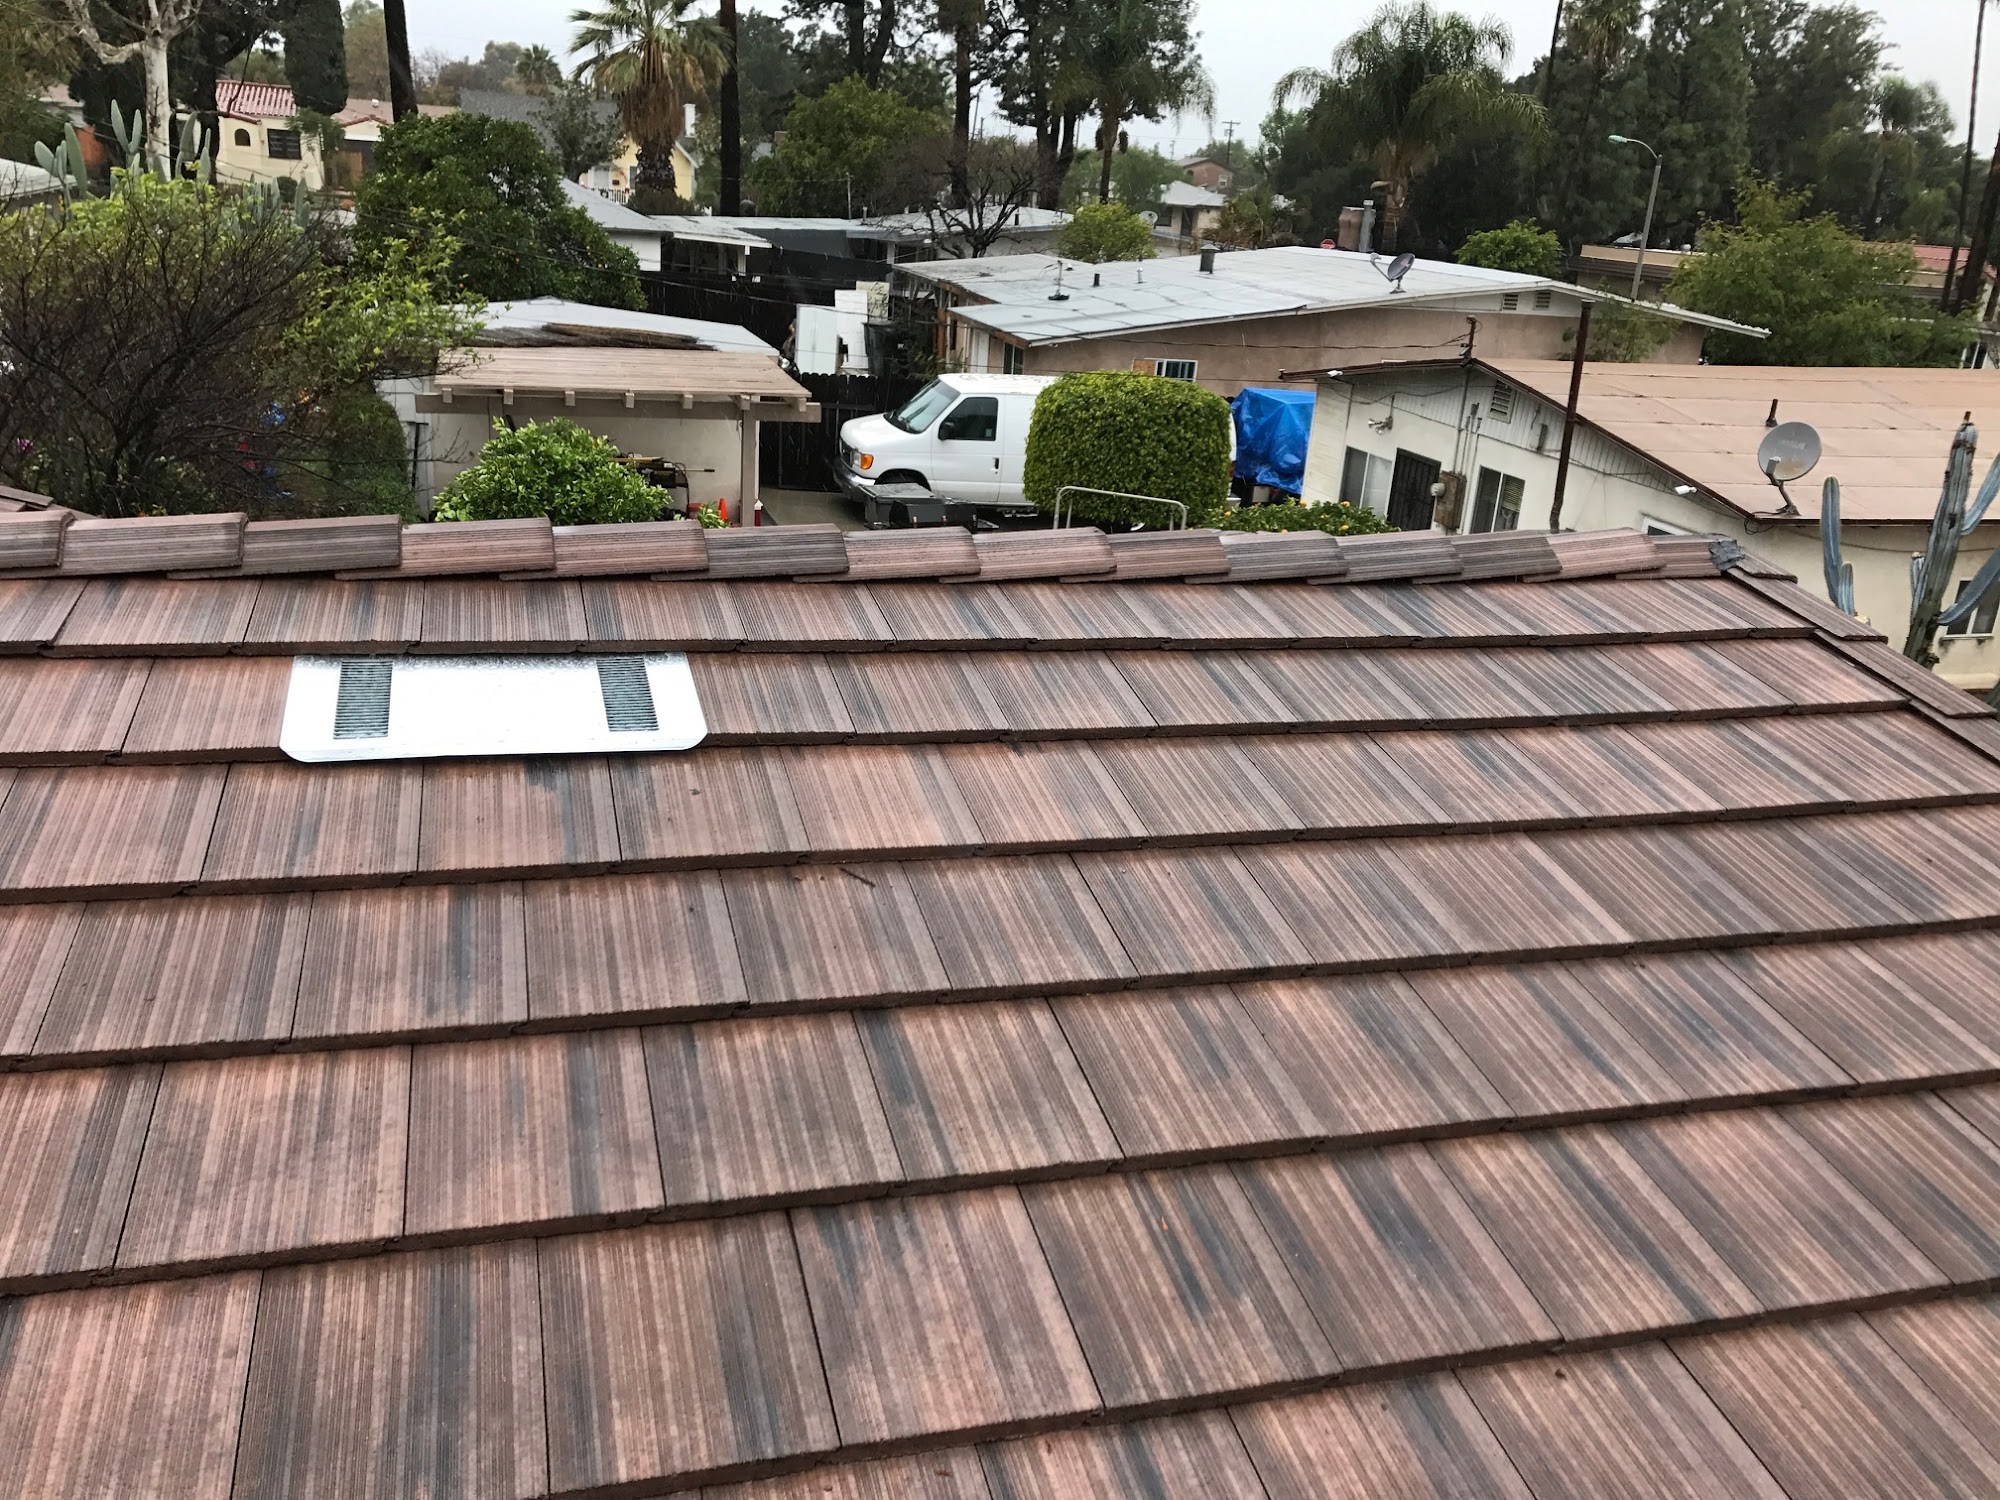 Superior Roofing Systems